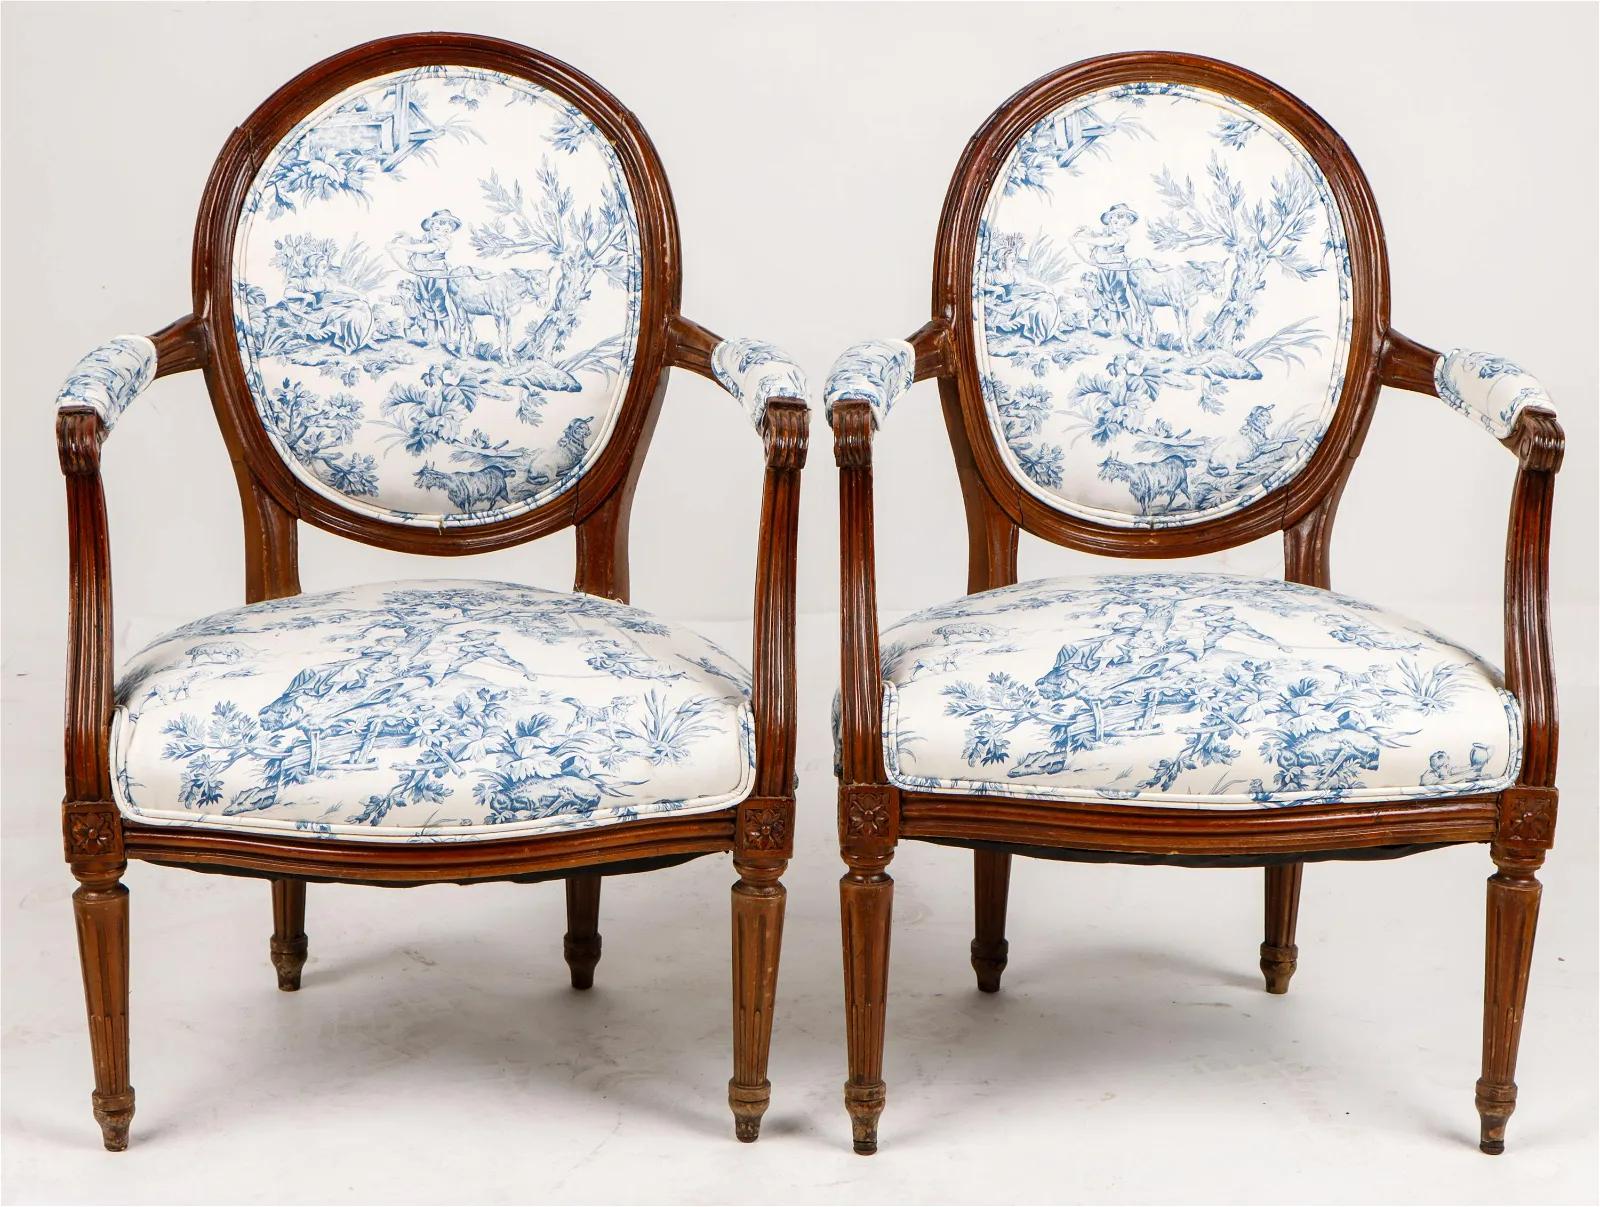 A pair of Louis XVI fauteuils in dark stained beech, with round backs and straight tapered and fluted legs, recently upholstered in blue and white toile de jouy fabric.